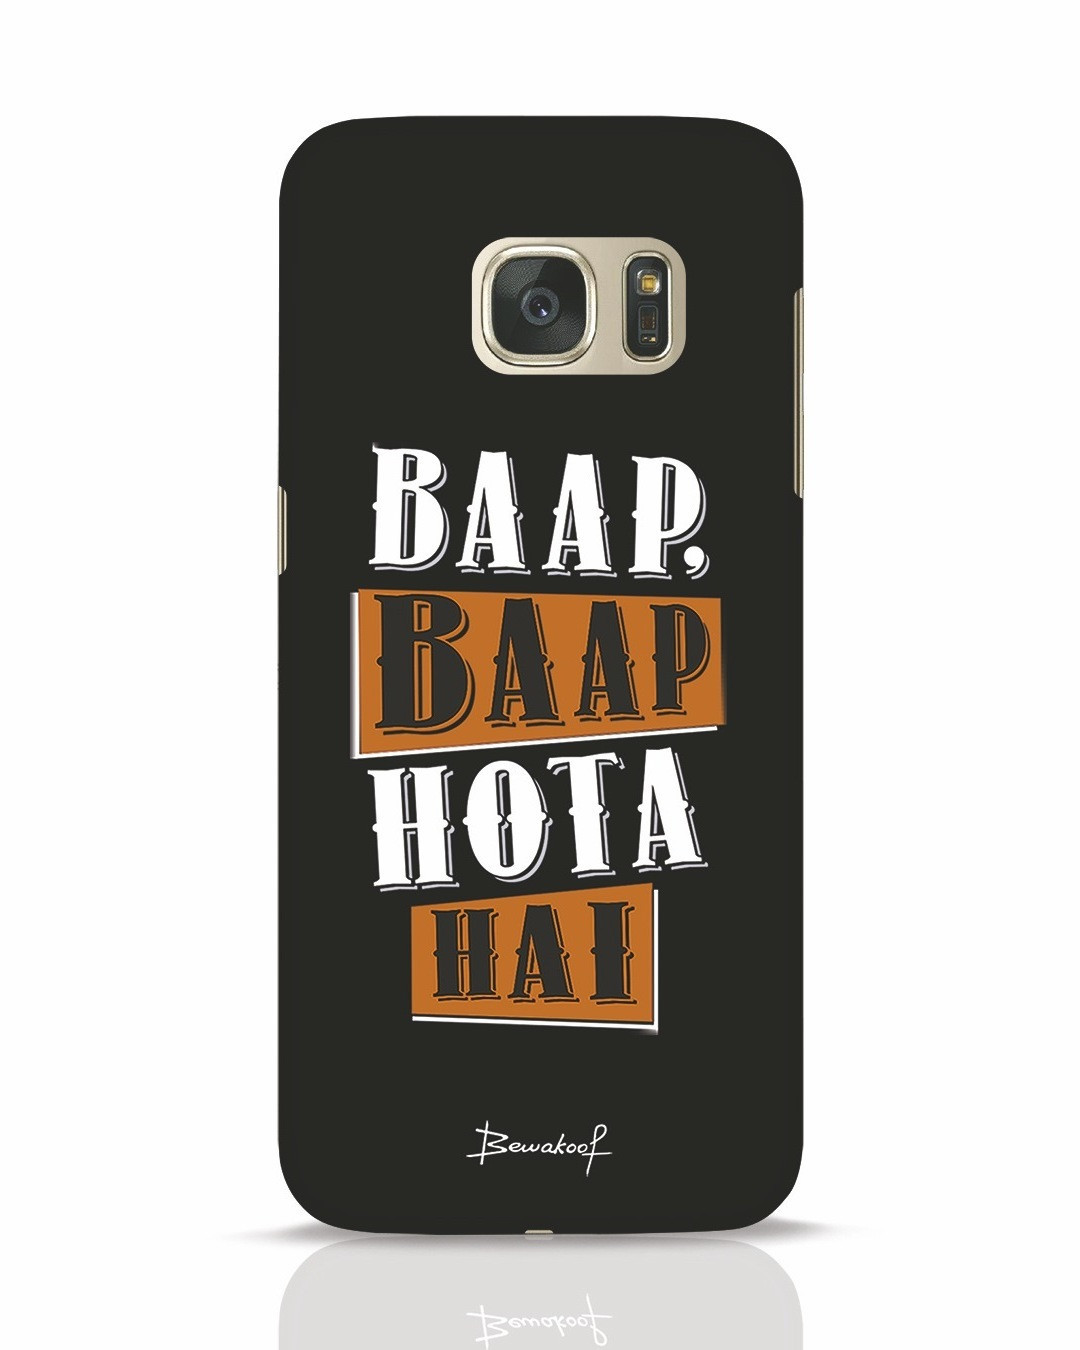 16 Recommended Galaxy Art Glass Vase 2024 free download galaxy art glass vase of samsung galaxy s7 mobile covers pertaining to baap baap hota hai samsung galaxy s7 mobile cover samsung galaxy s7 mobile covers